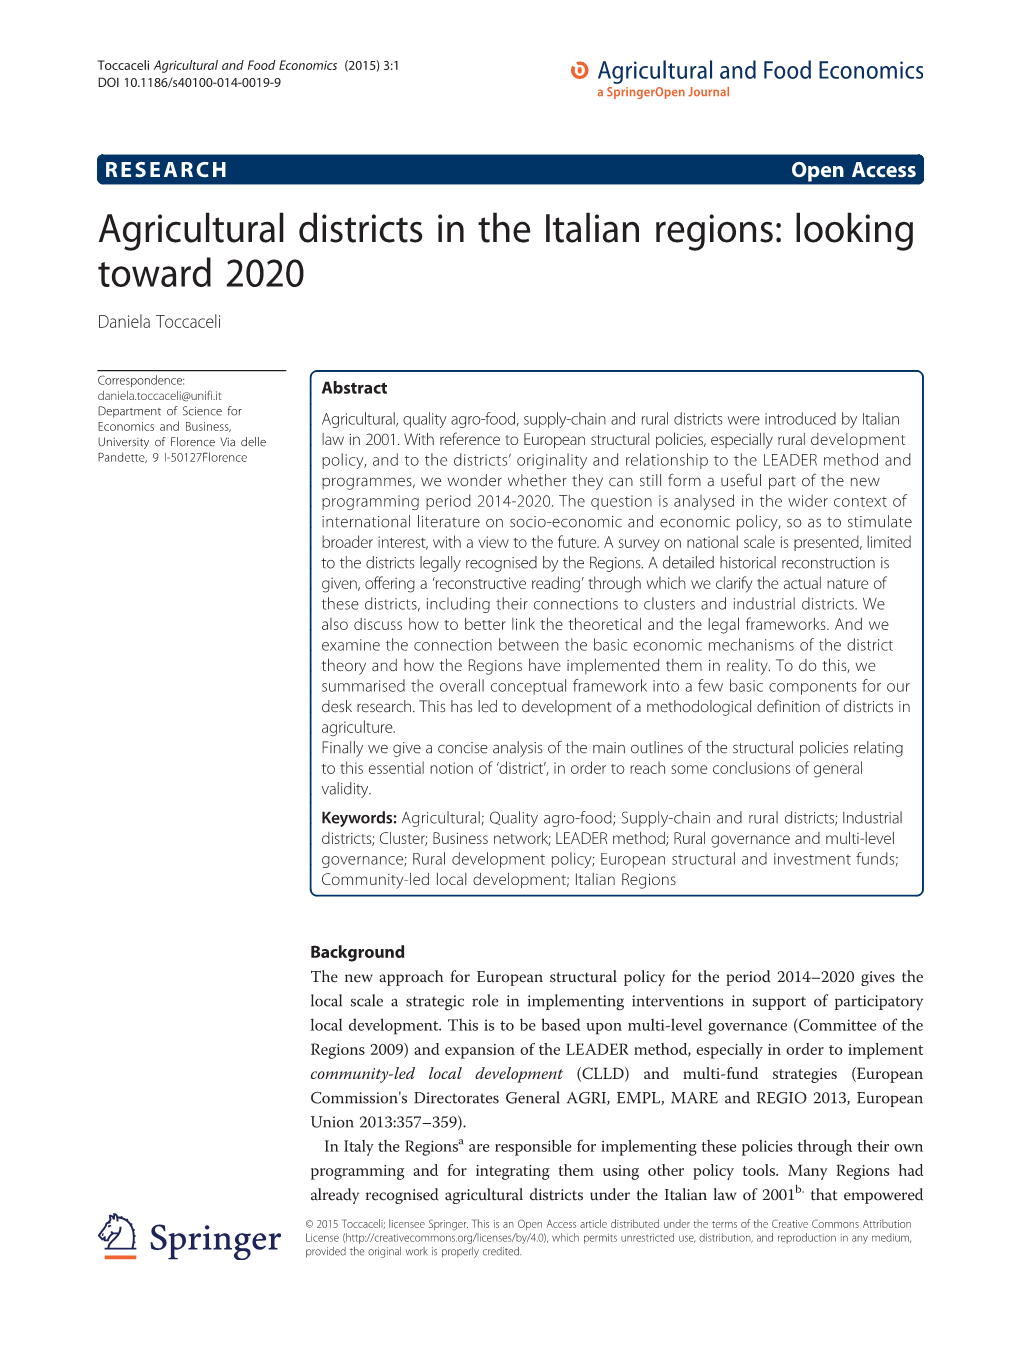 Agricultural Districts in the Italian Regions: Looking Toward 2020 Daniela Toccaceli